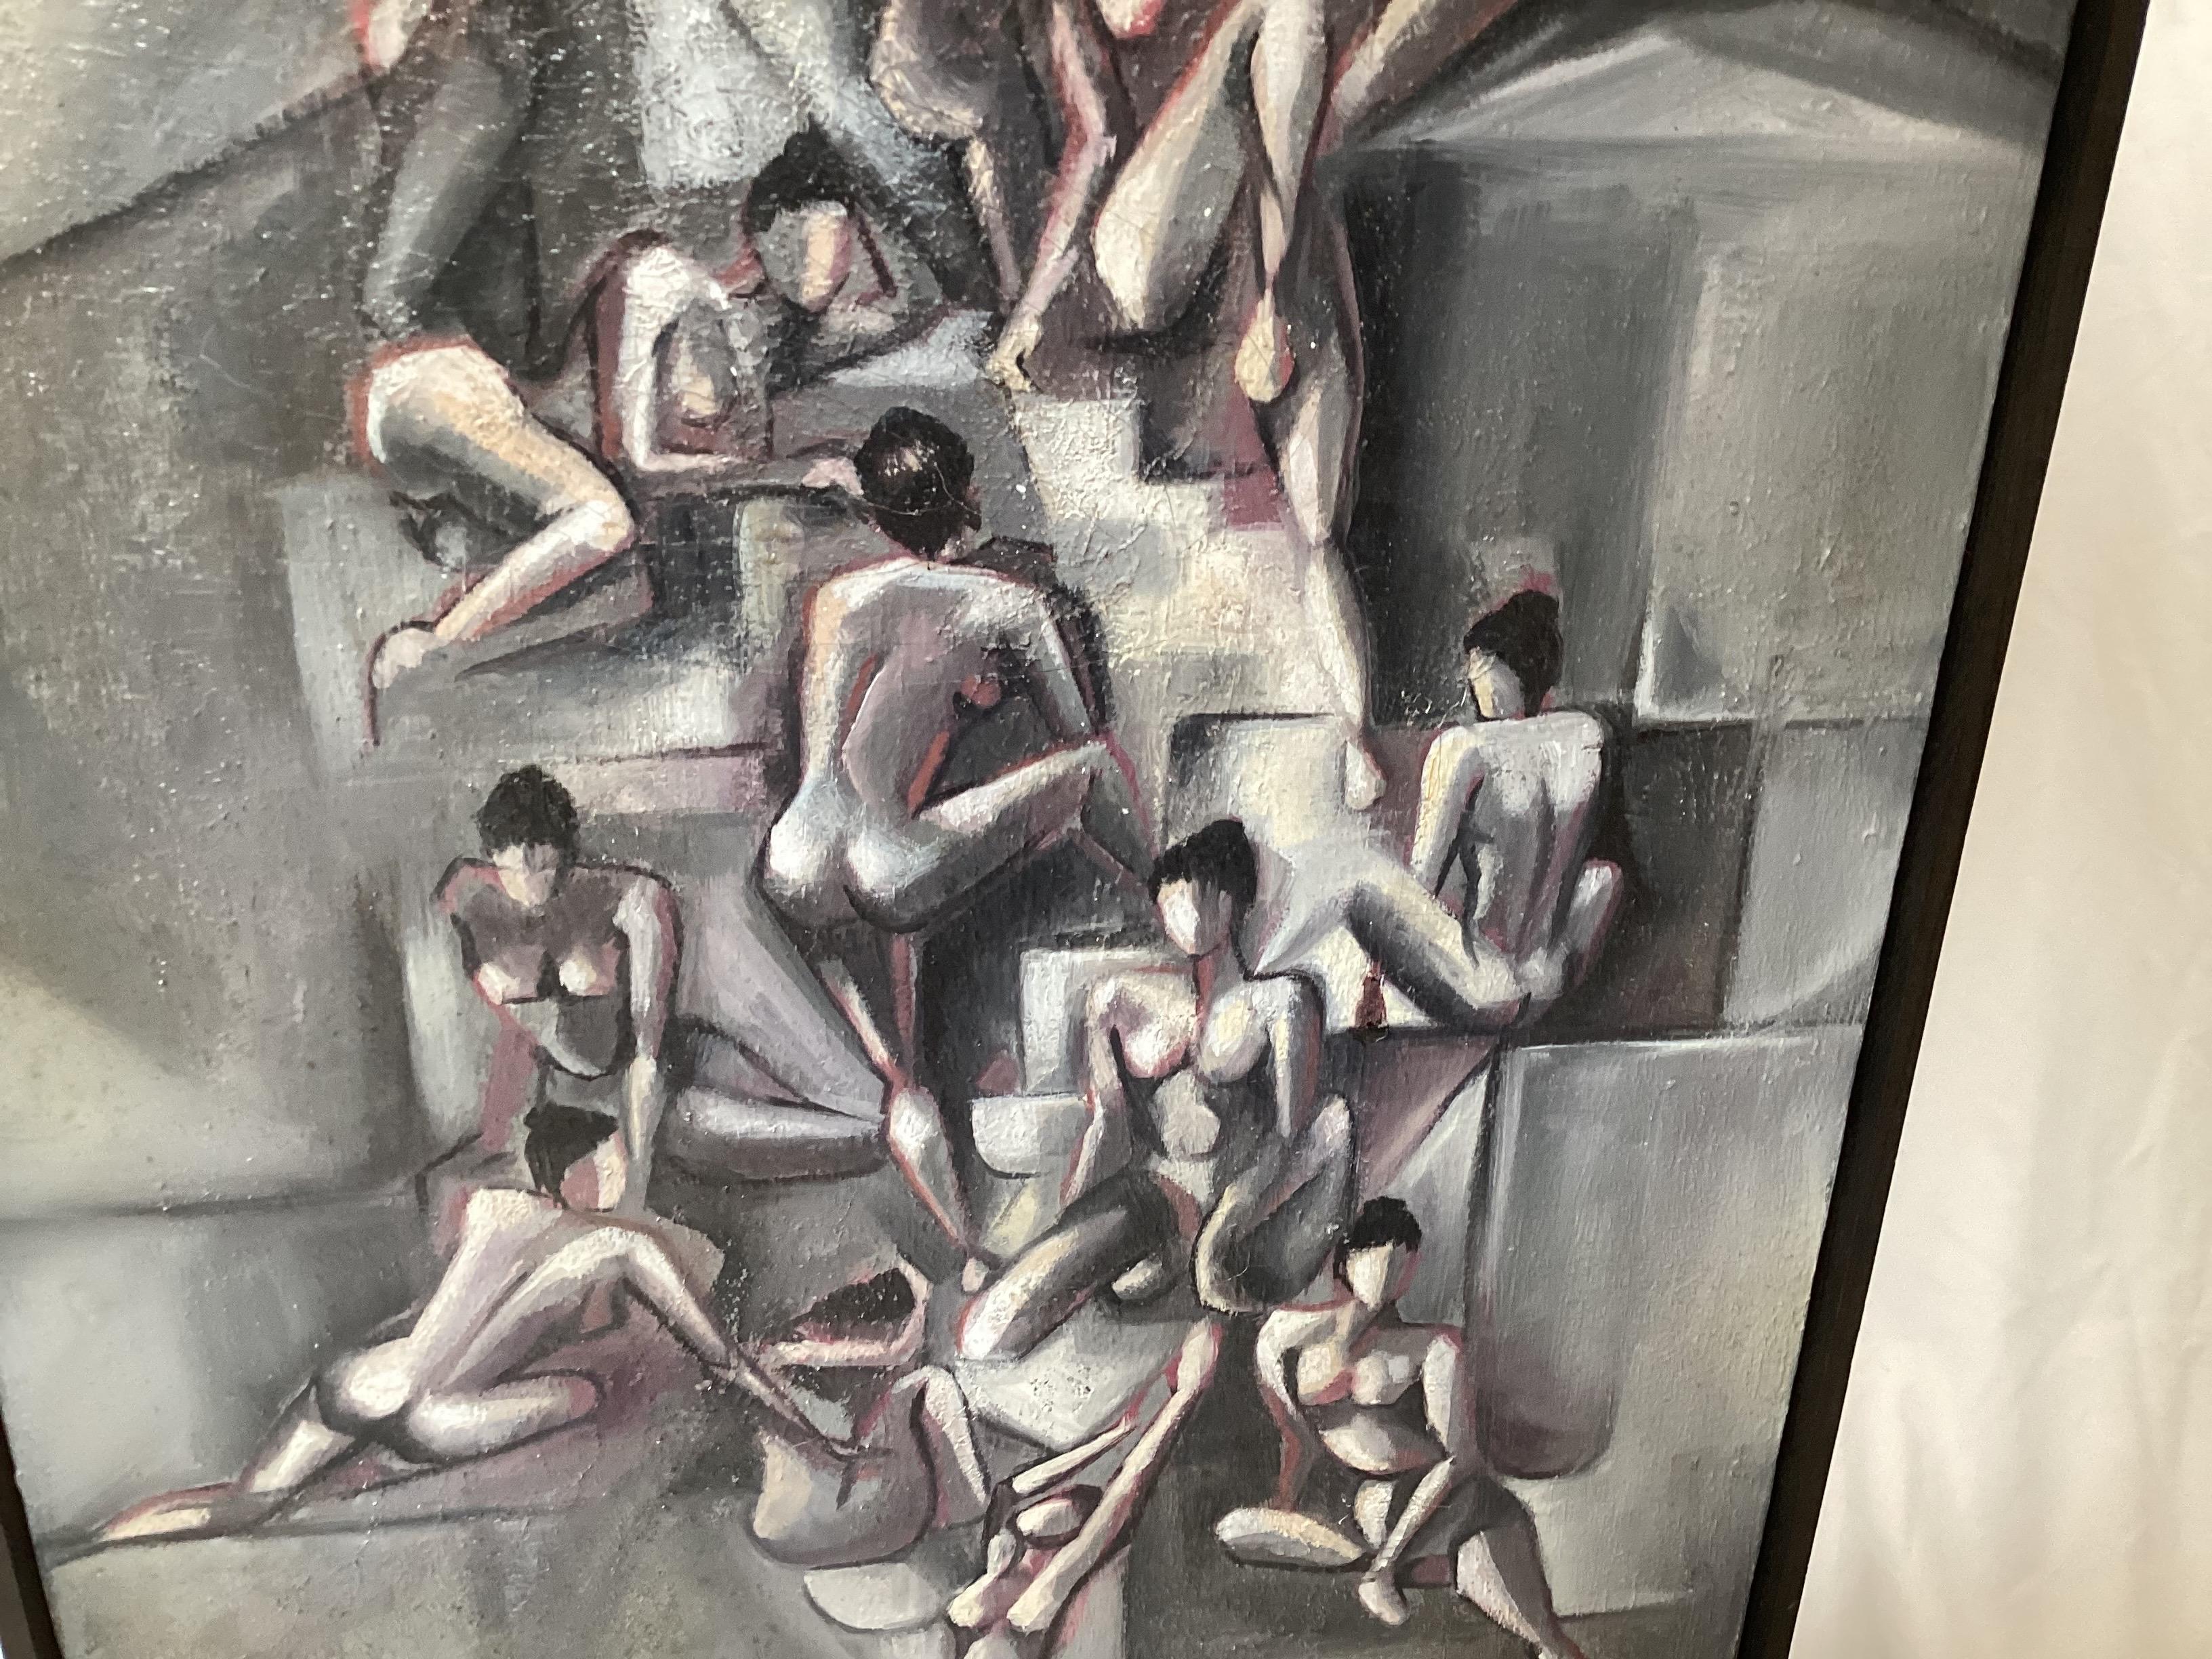 An oil painting on canvas features 15 female nudes in the cubist style in erotic positions  on a background of cubist shapes. All the images blend nicely in shades of grey, white, reddish hues with a sandy texture. The piece is framed in a black